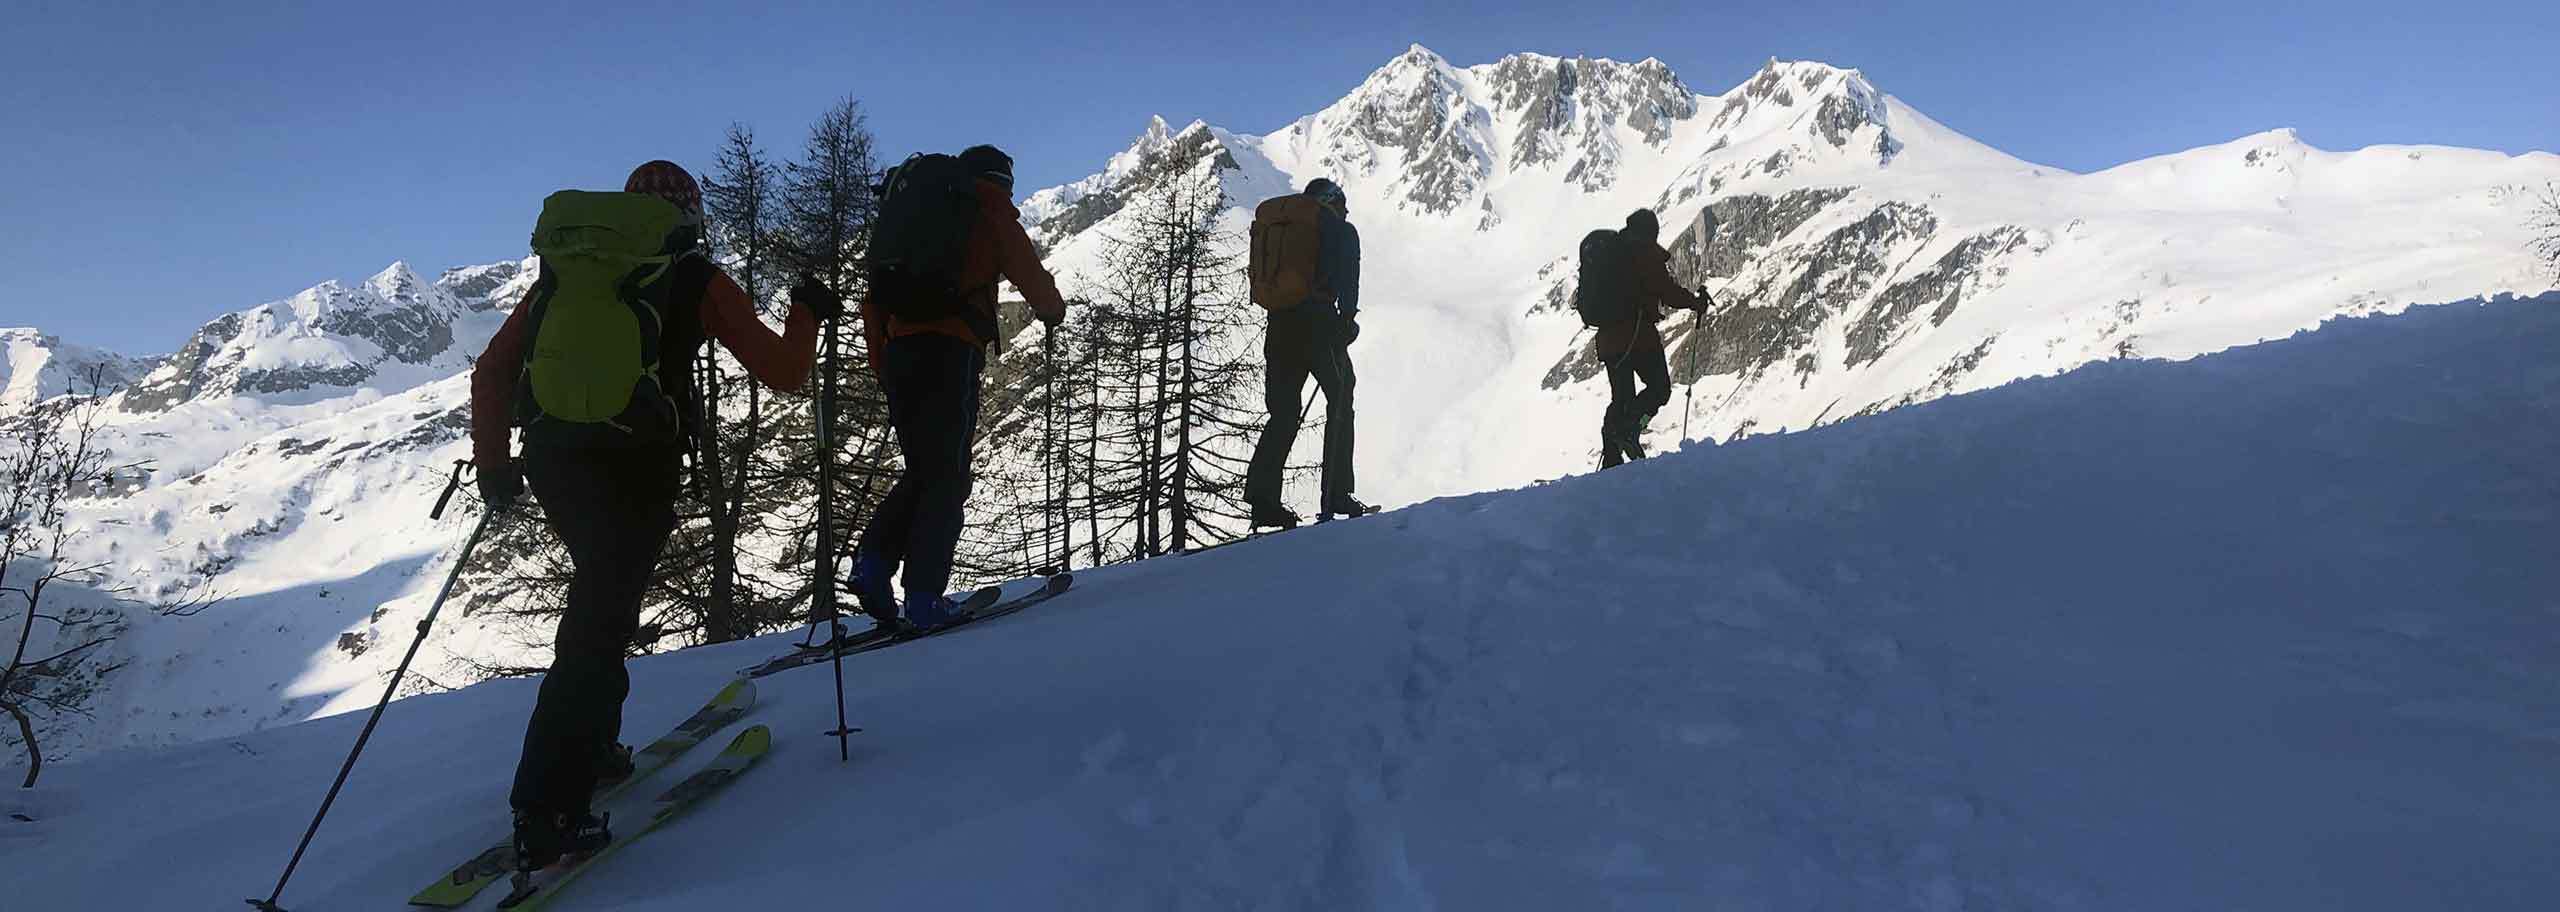 Ski Mountaineering in Crévacol with Mountain Guide